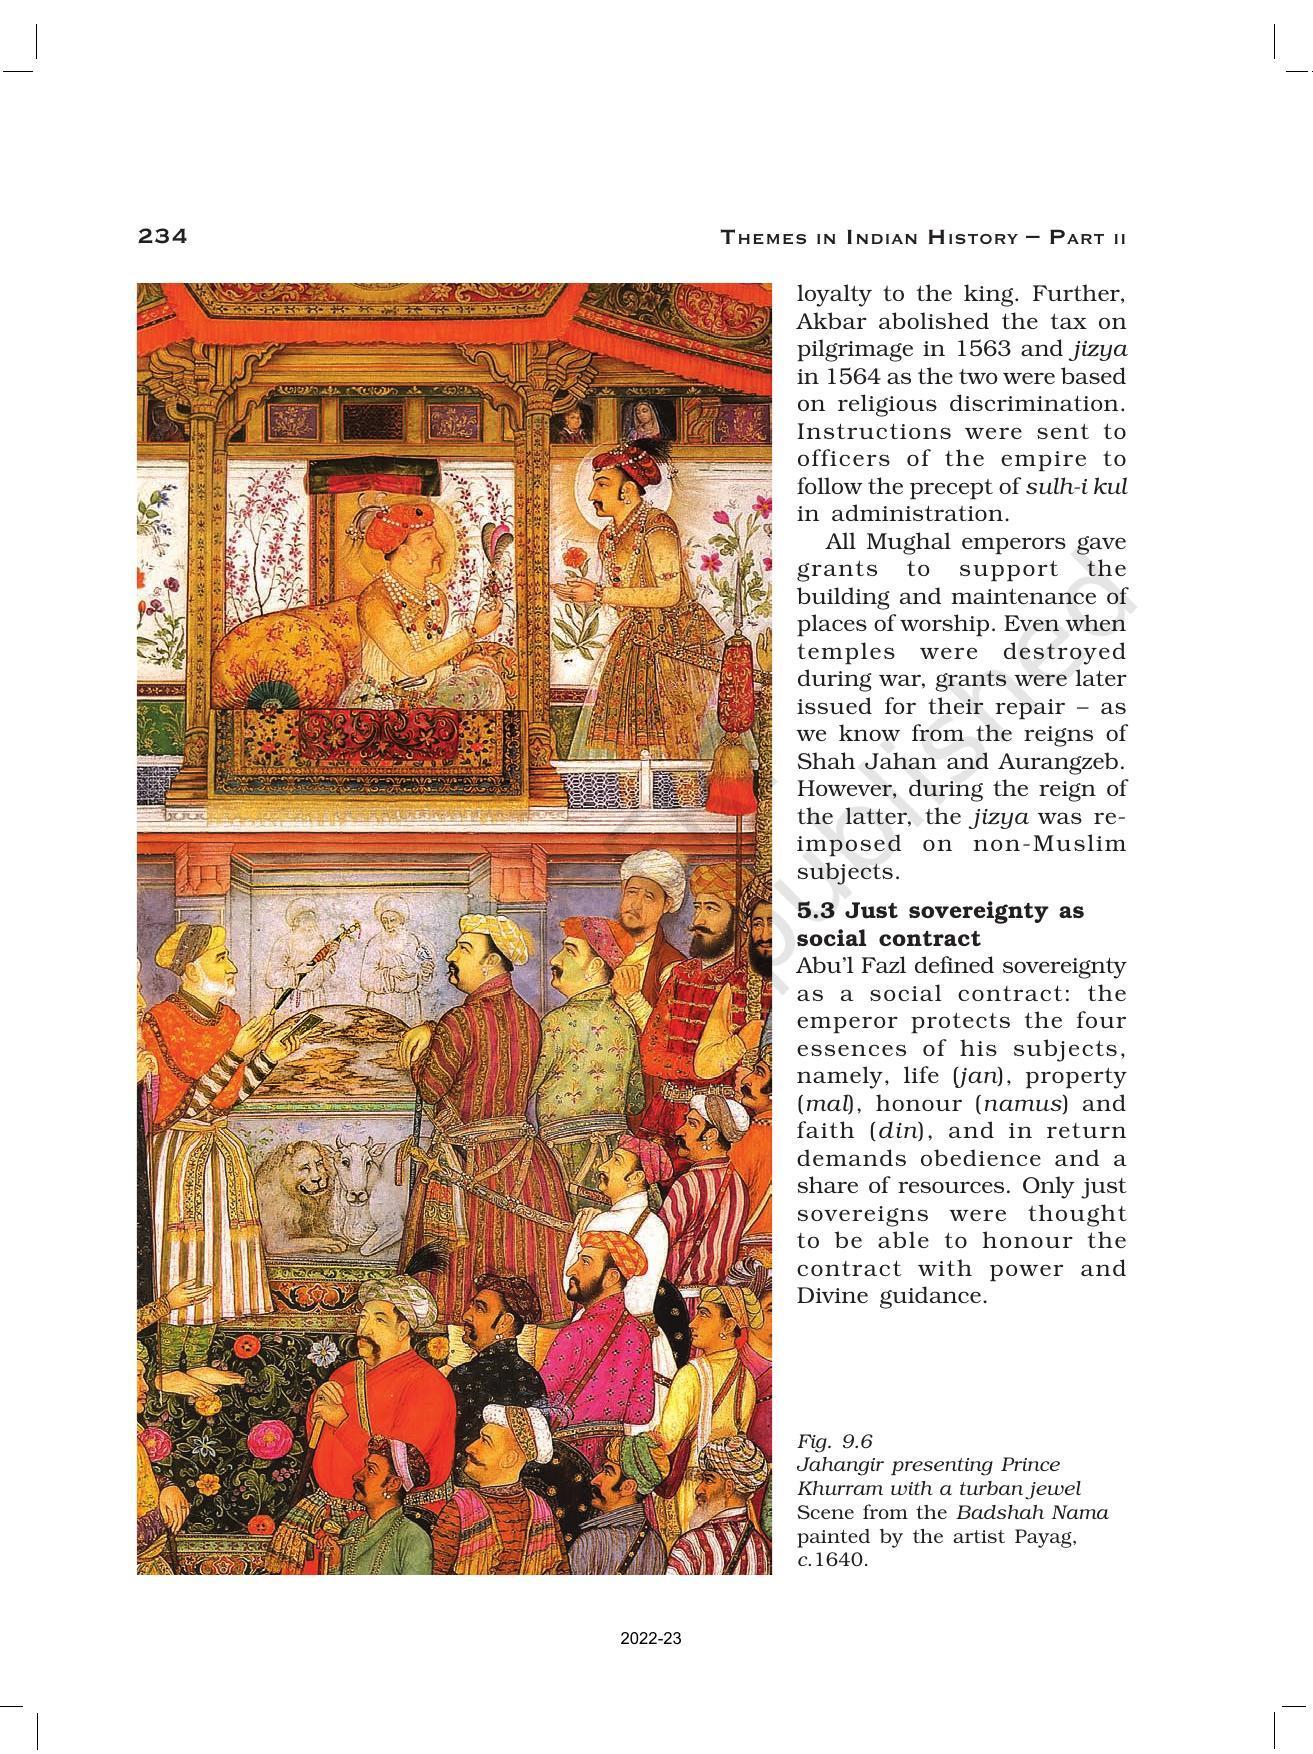 NCERT Book for Class 12 History (Part-II) Chapter 9 Kings and Chronicles - Page 11